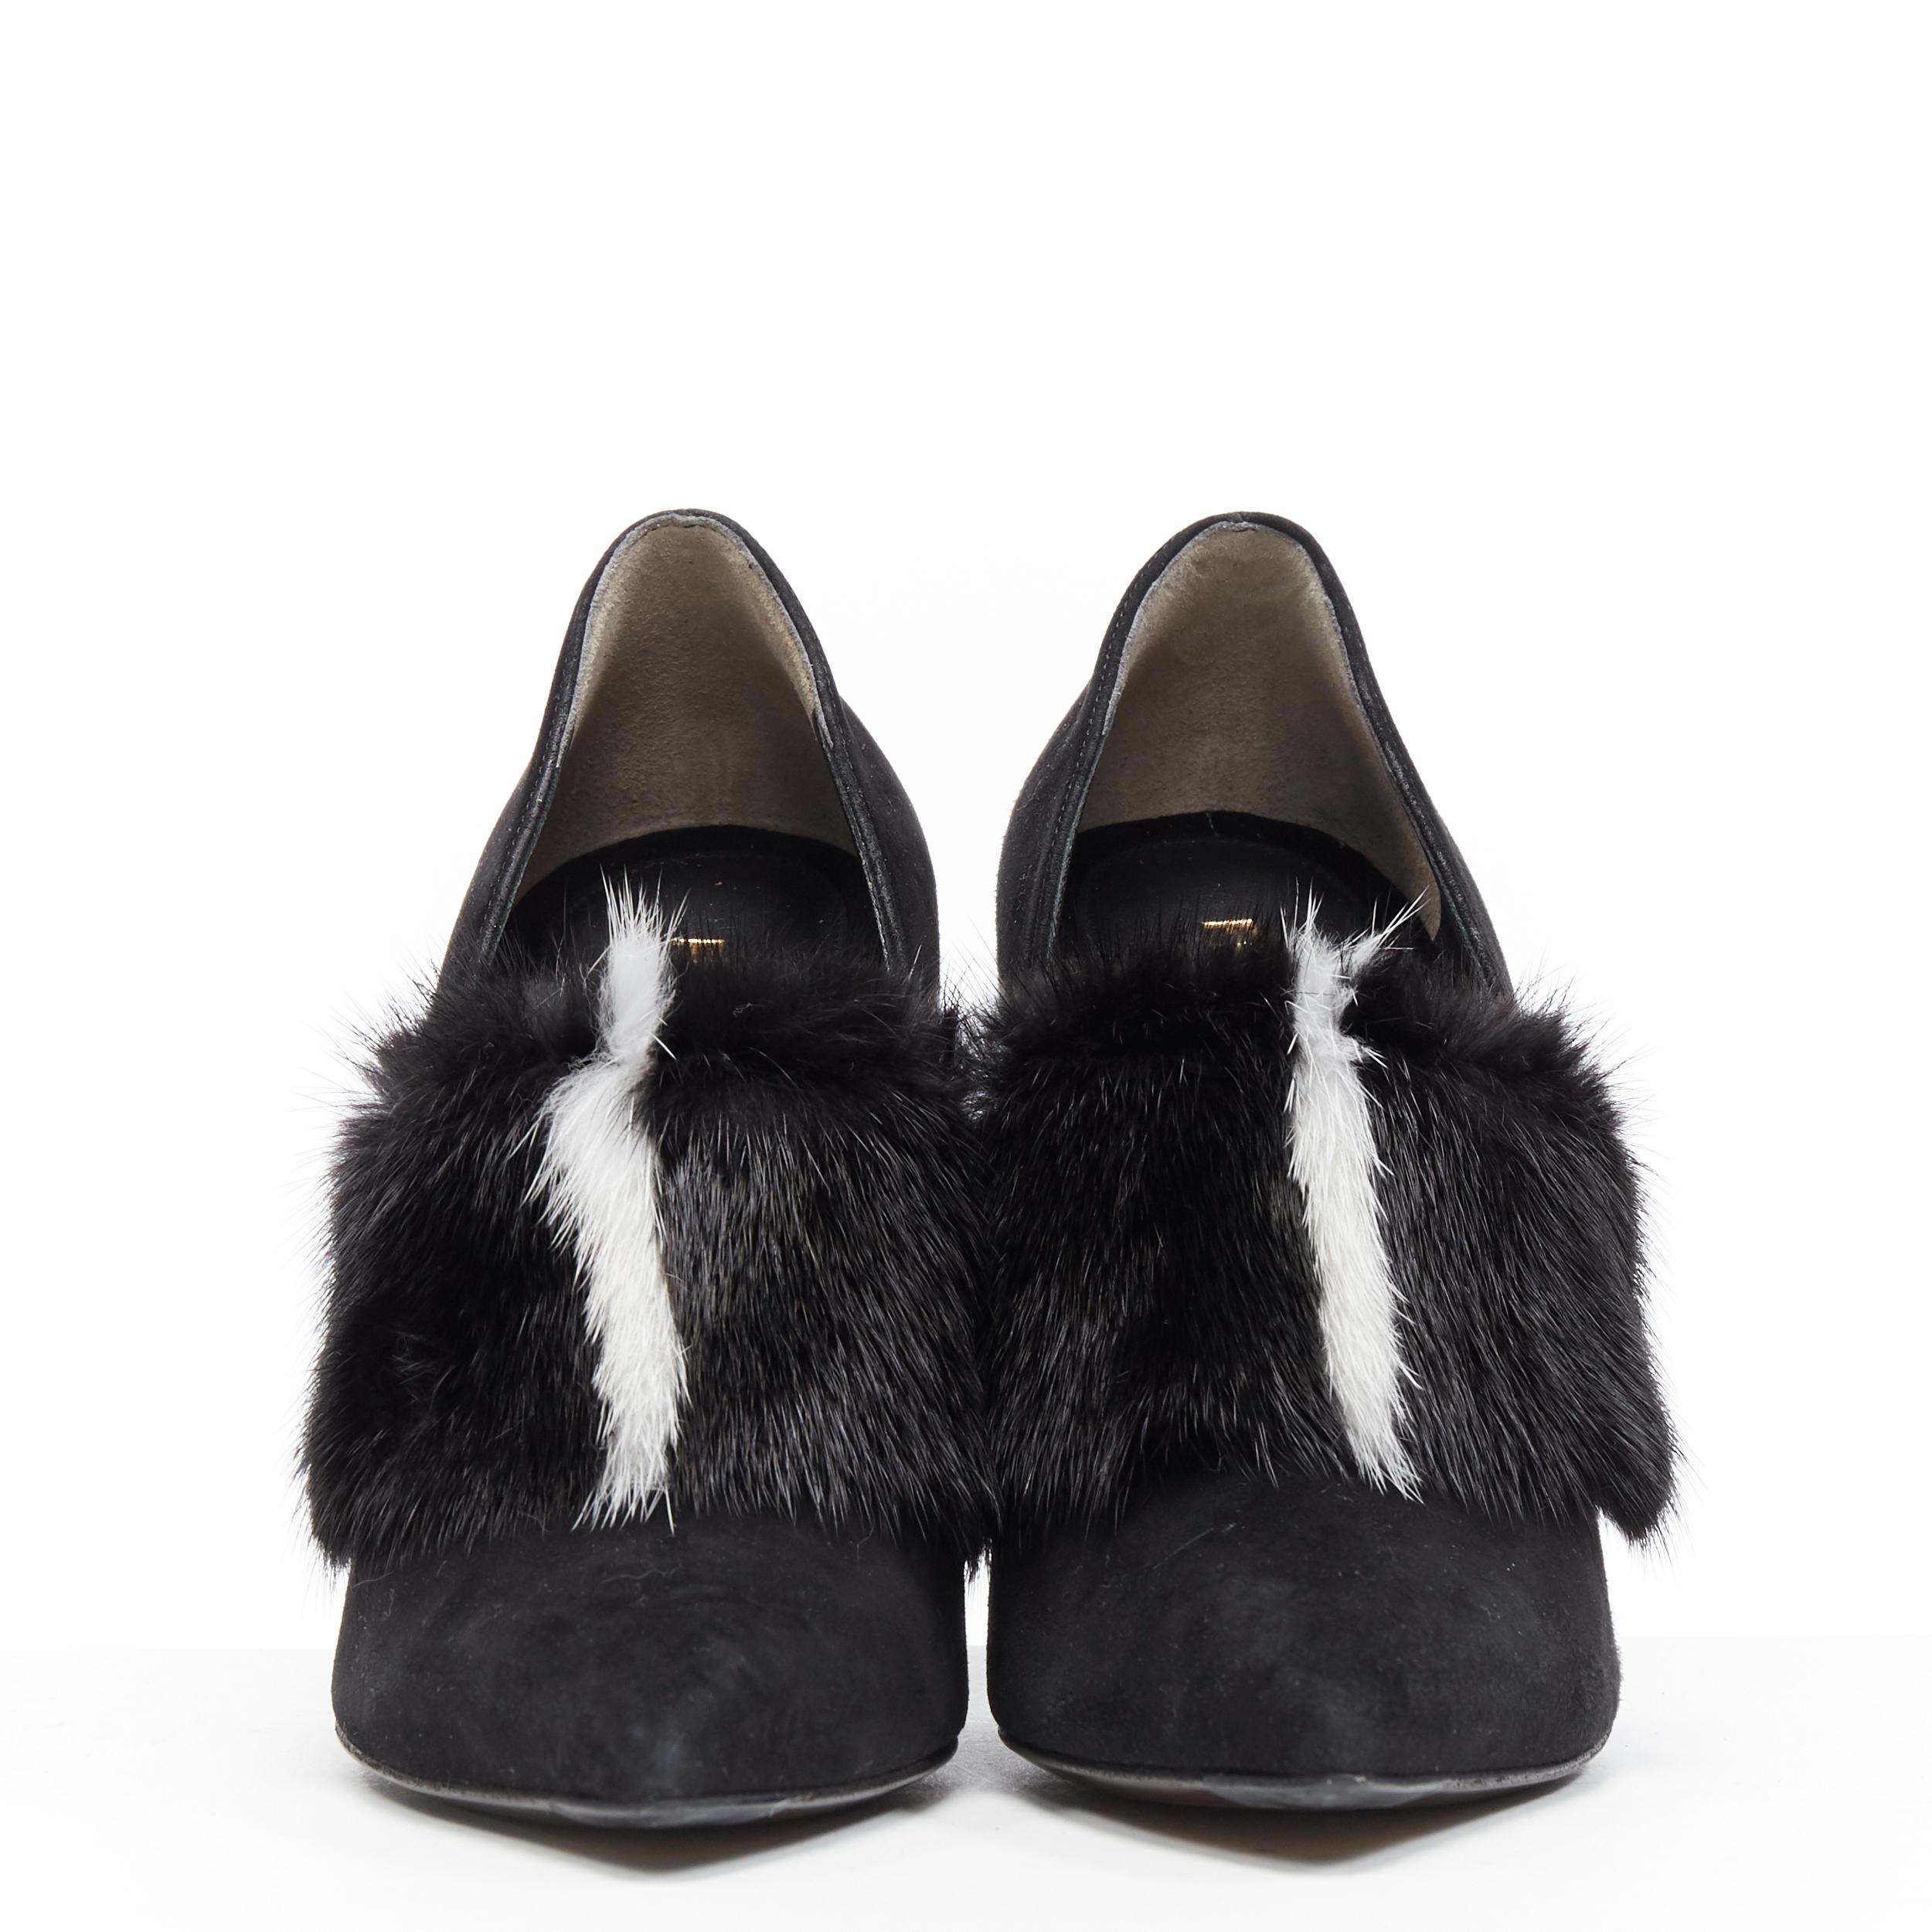 heels with fur in front